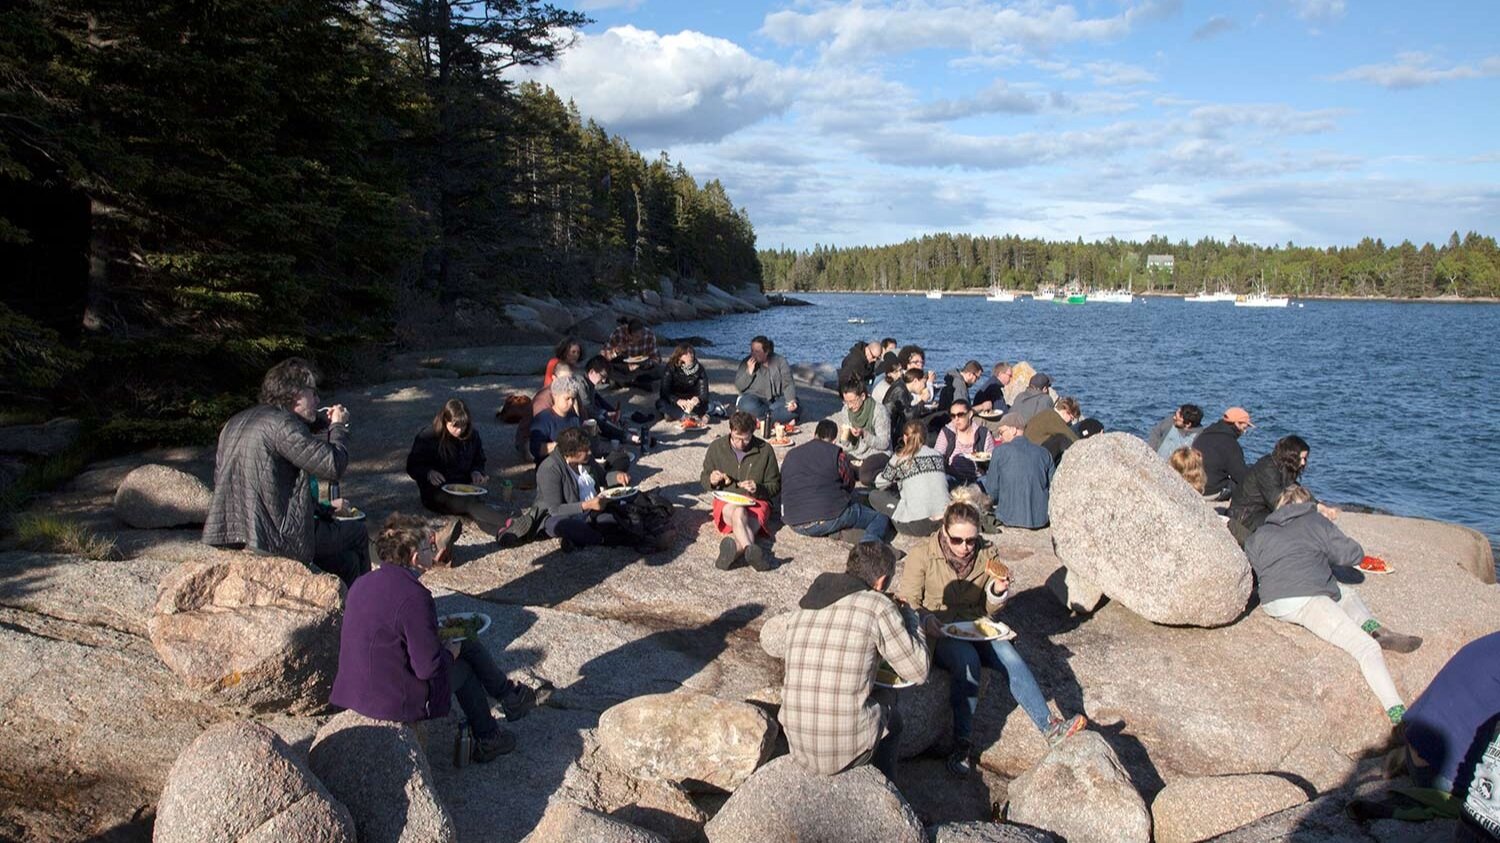 People sit on rocks near the ocean, eating lunch